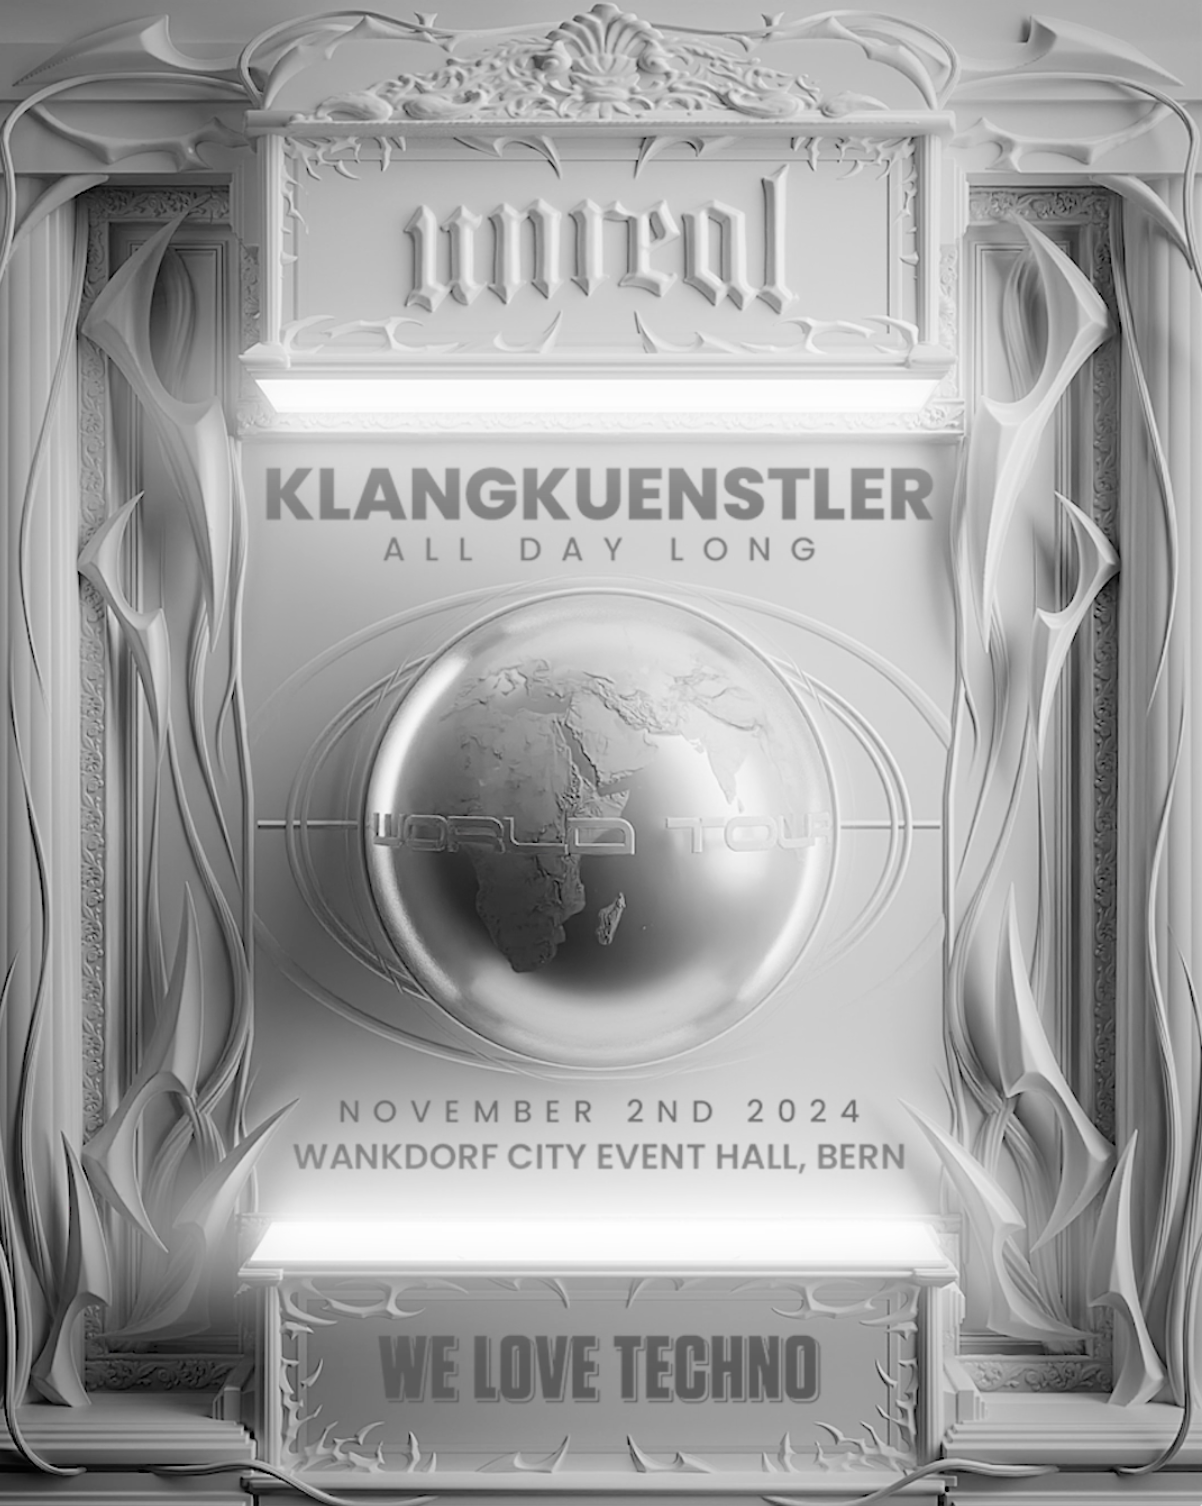 Unreal x KlangKuenstler ALL DAY LONG (World Tour) - Switzerland pres. by WE LOVE TECHNO - フライヤー表